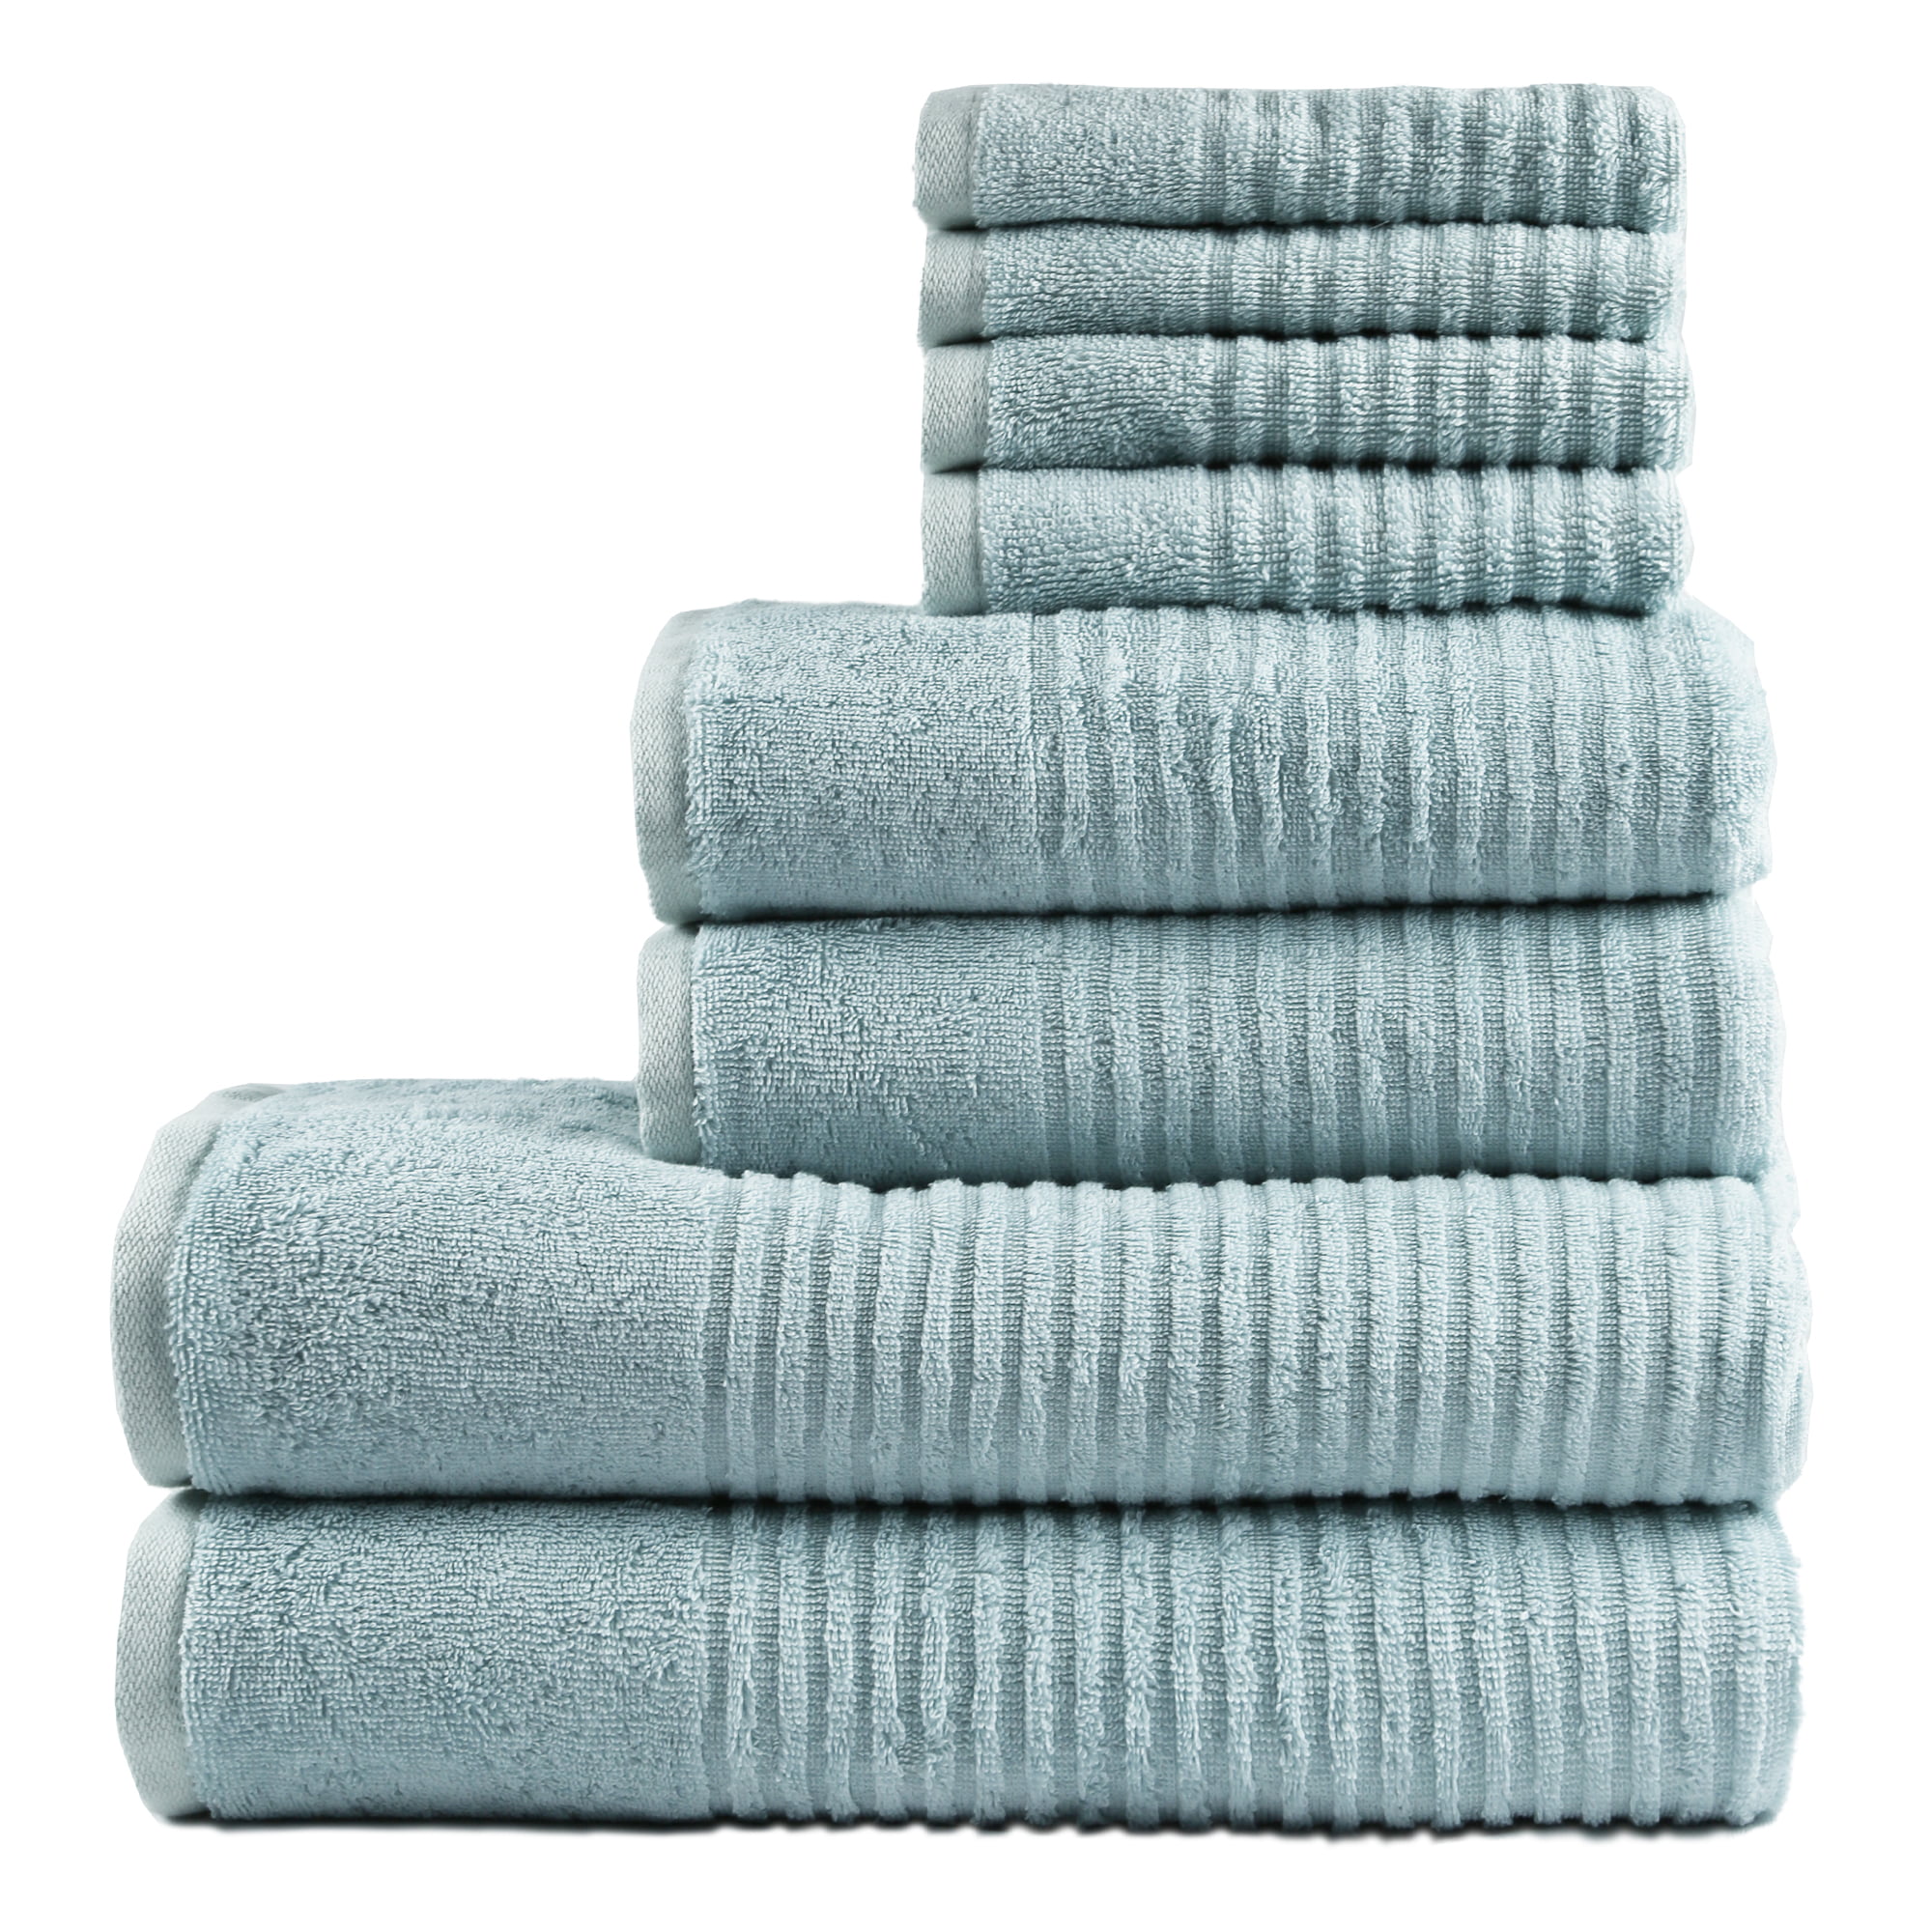 50% OFF NOW! Ultra-Soft DUCK EGG BLUE 2 x Organic bamboo towels 